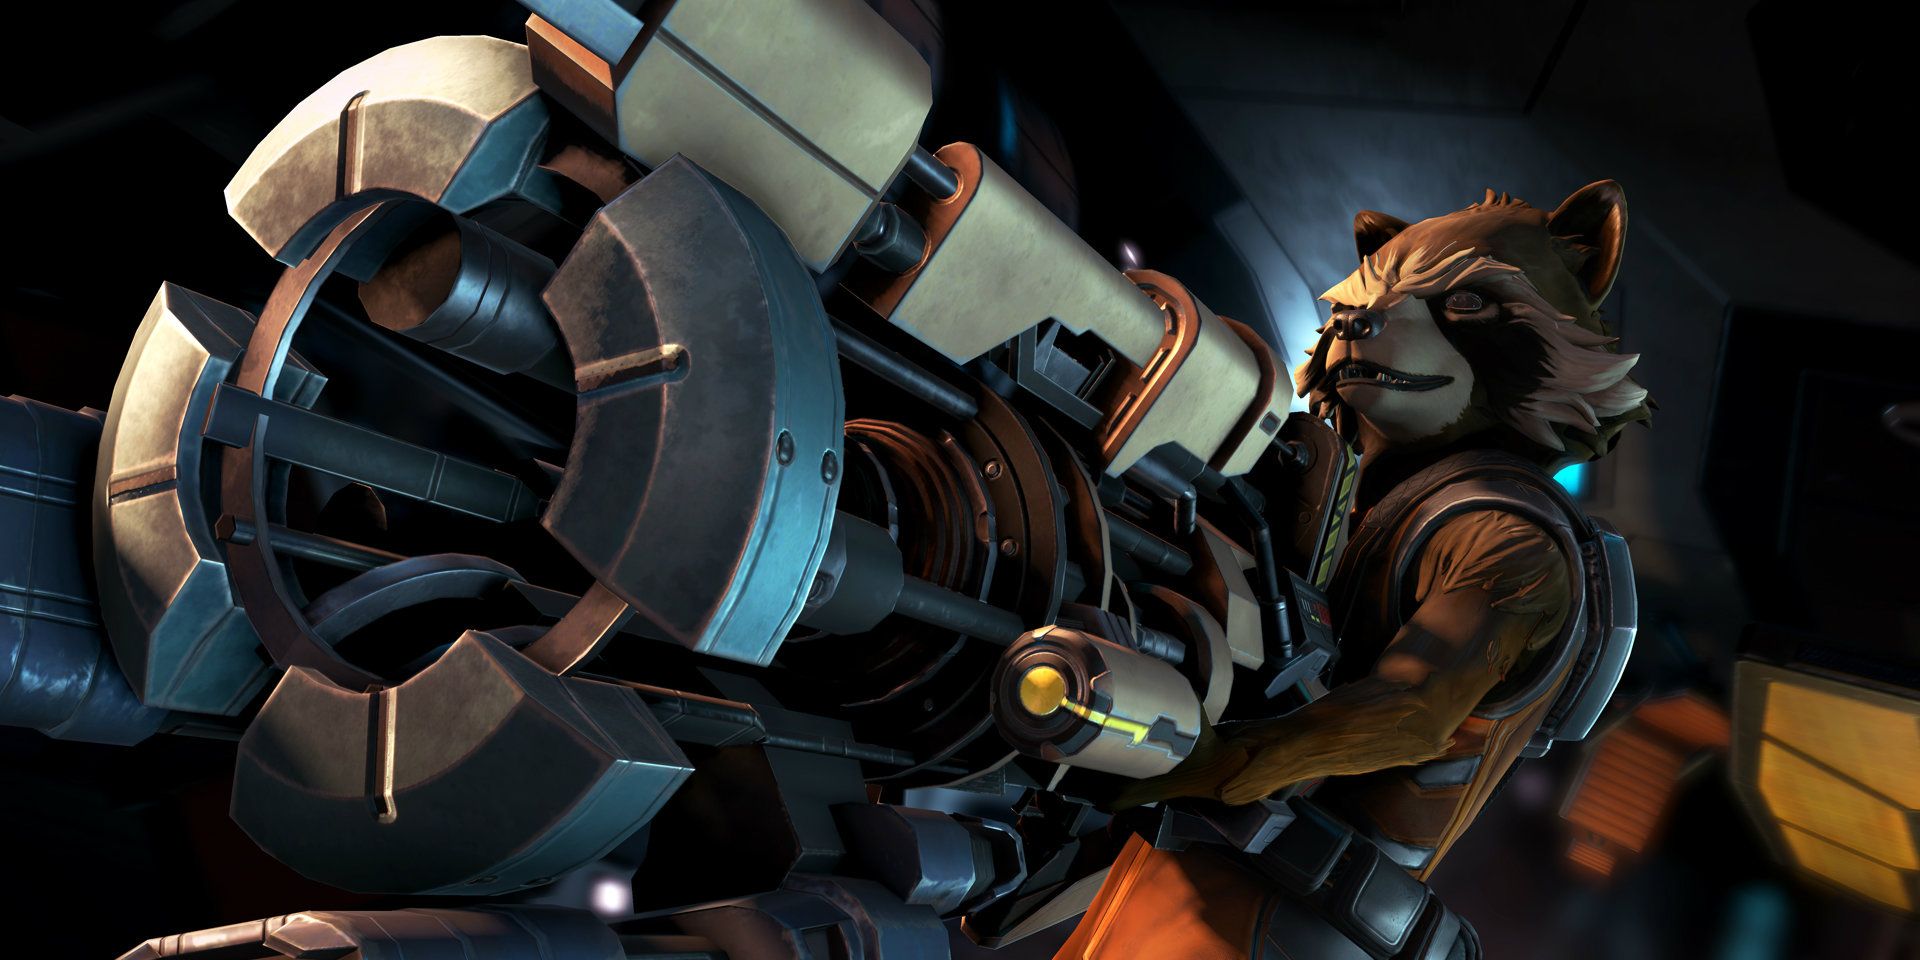 guardians of the galaxy telltale full game download free